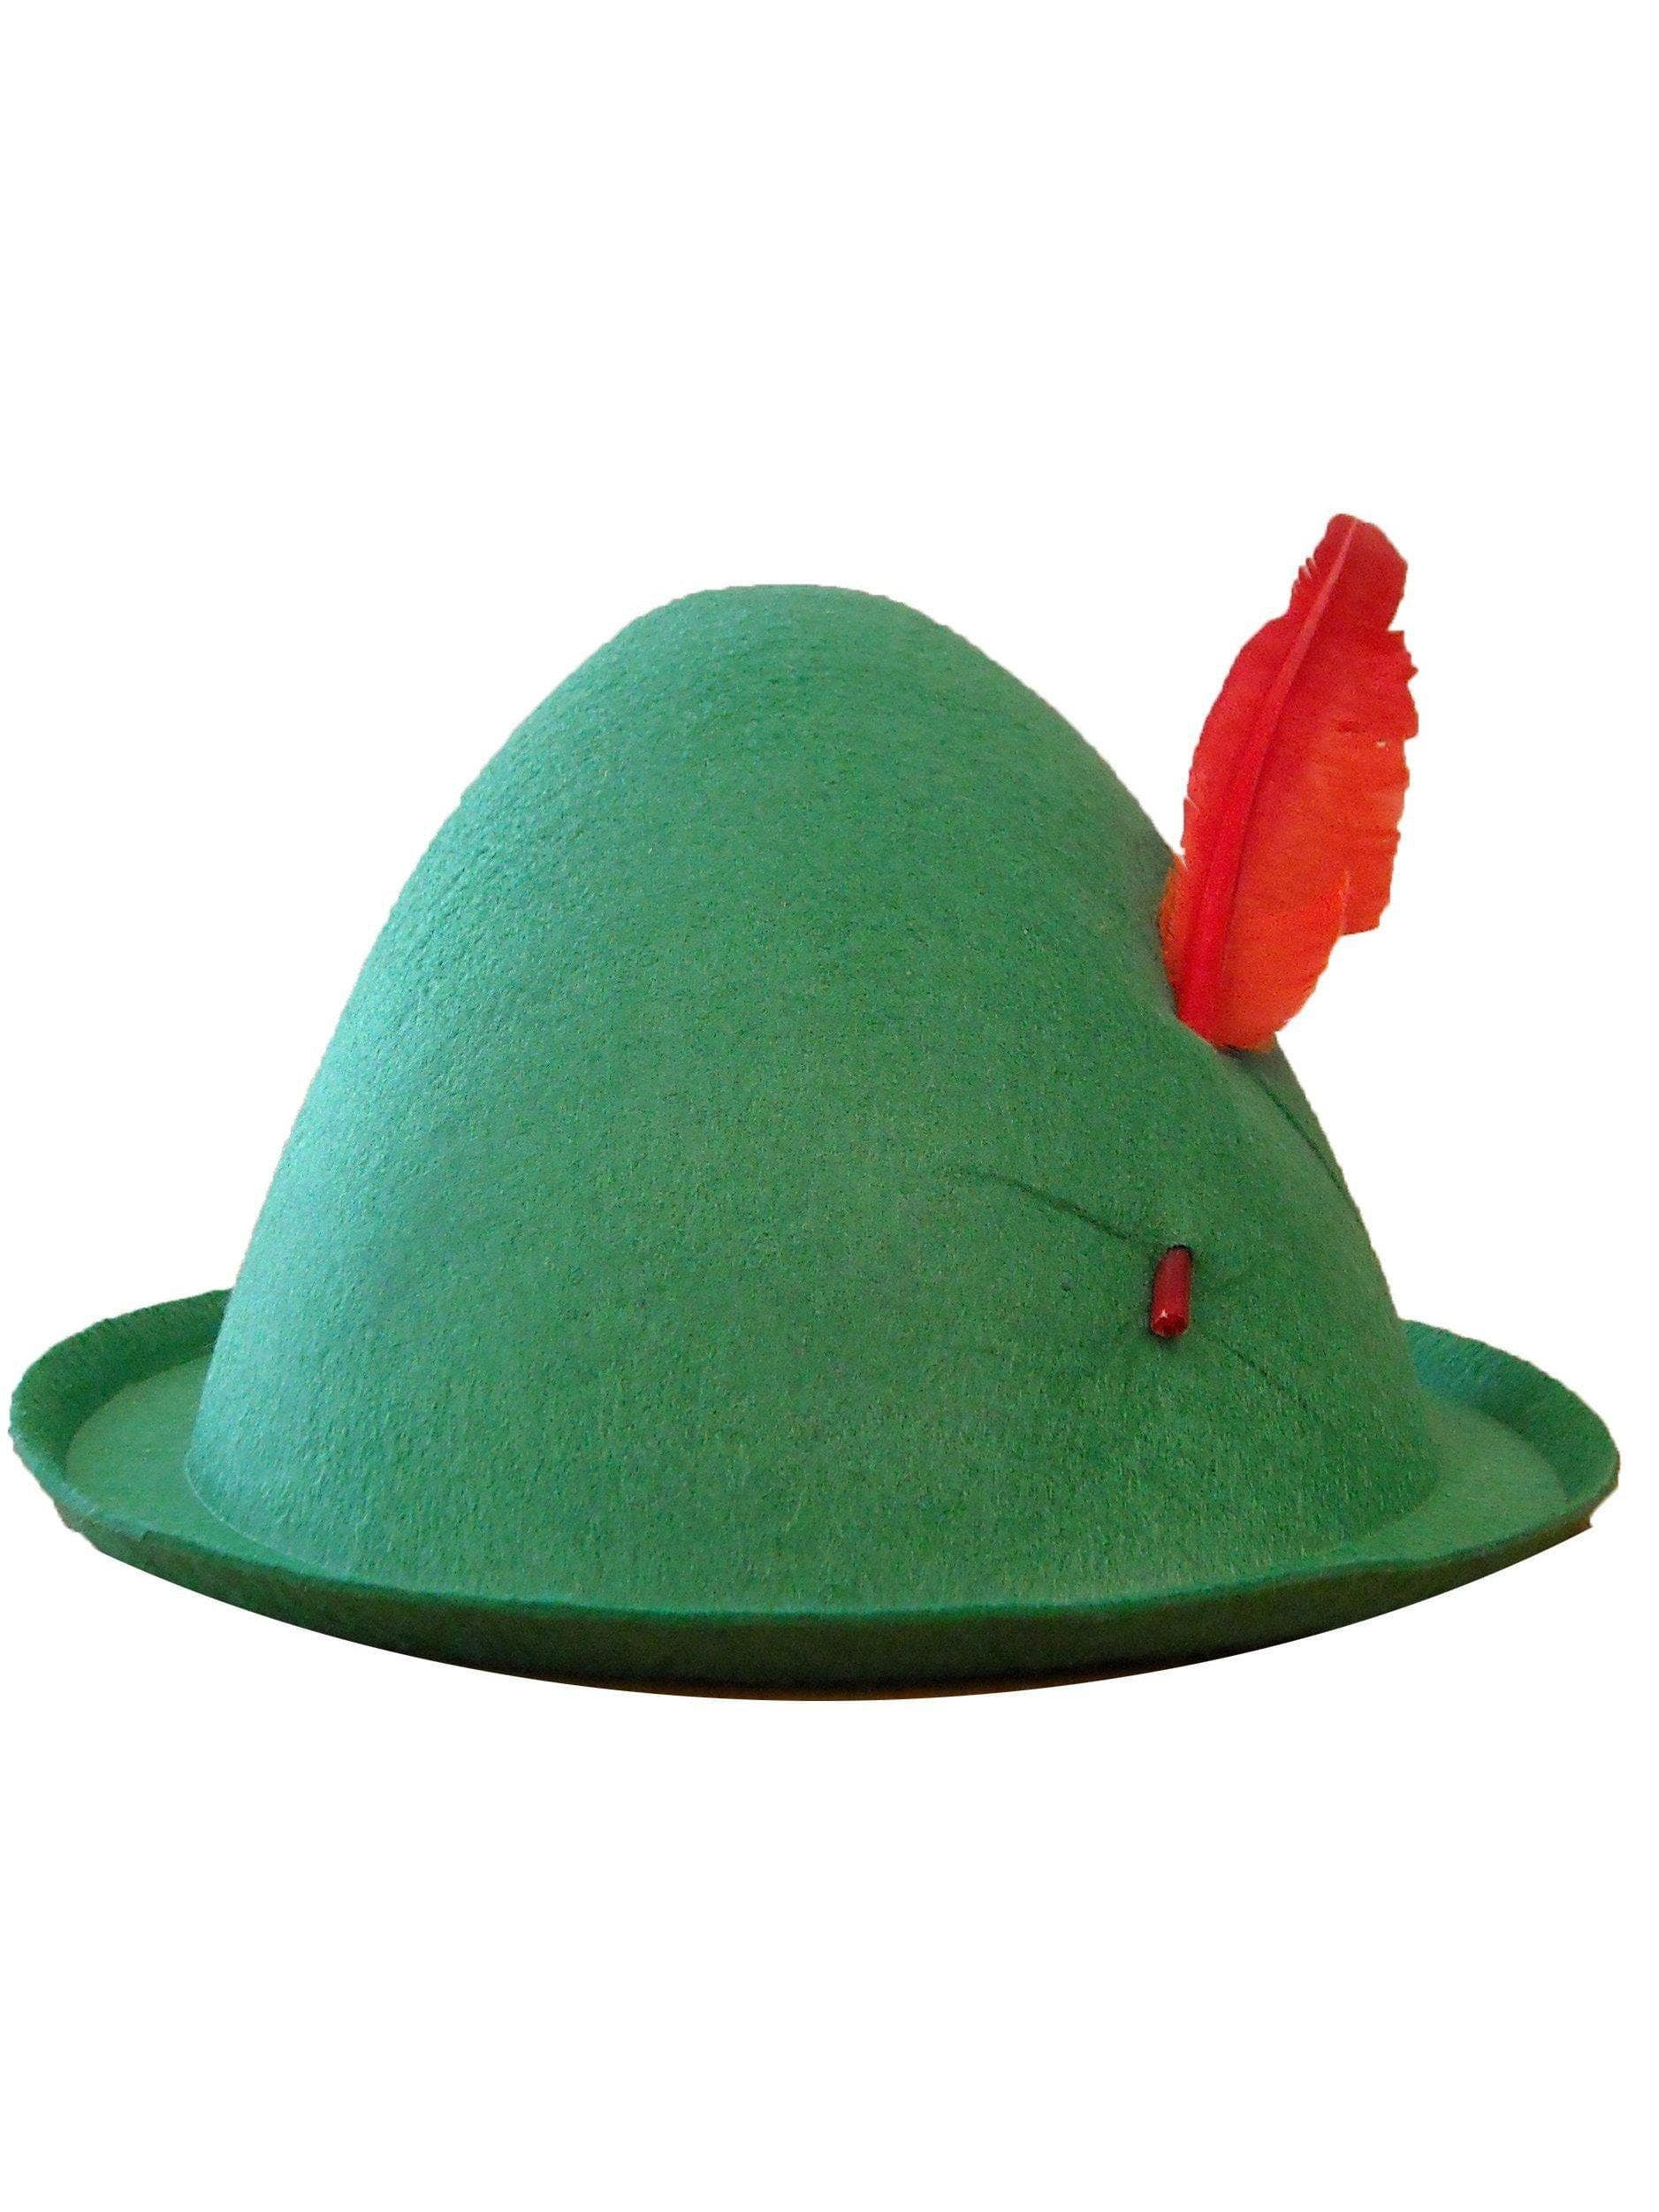 Adult Green Alpine Inspired Tyrolean Hat - costumes.com